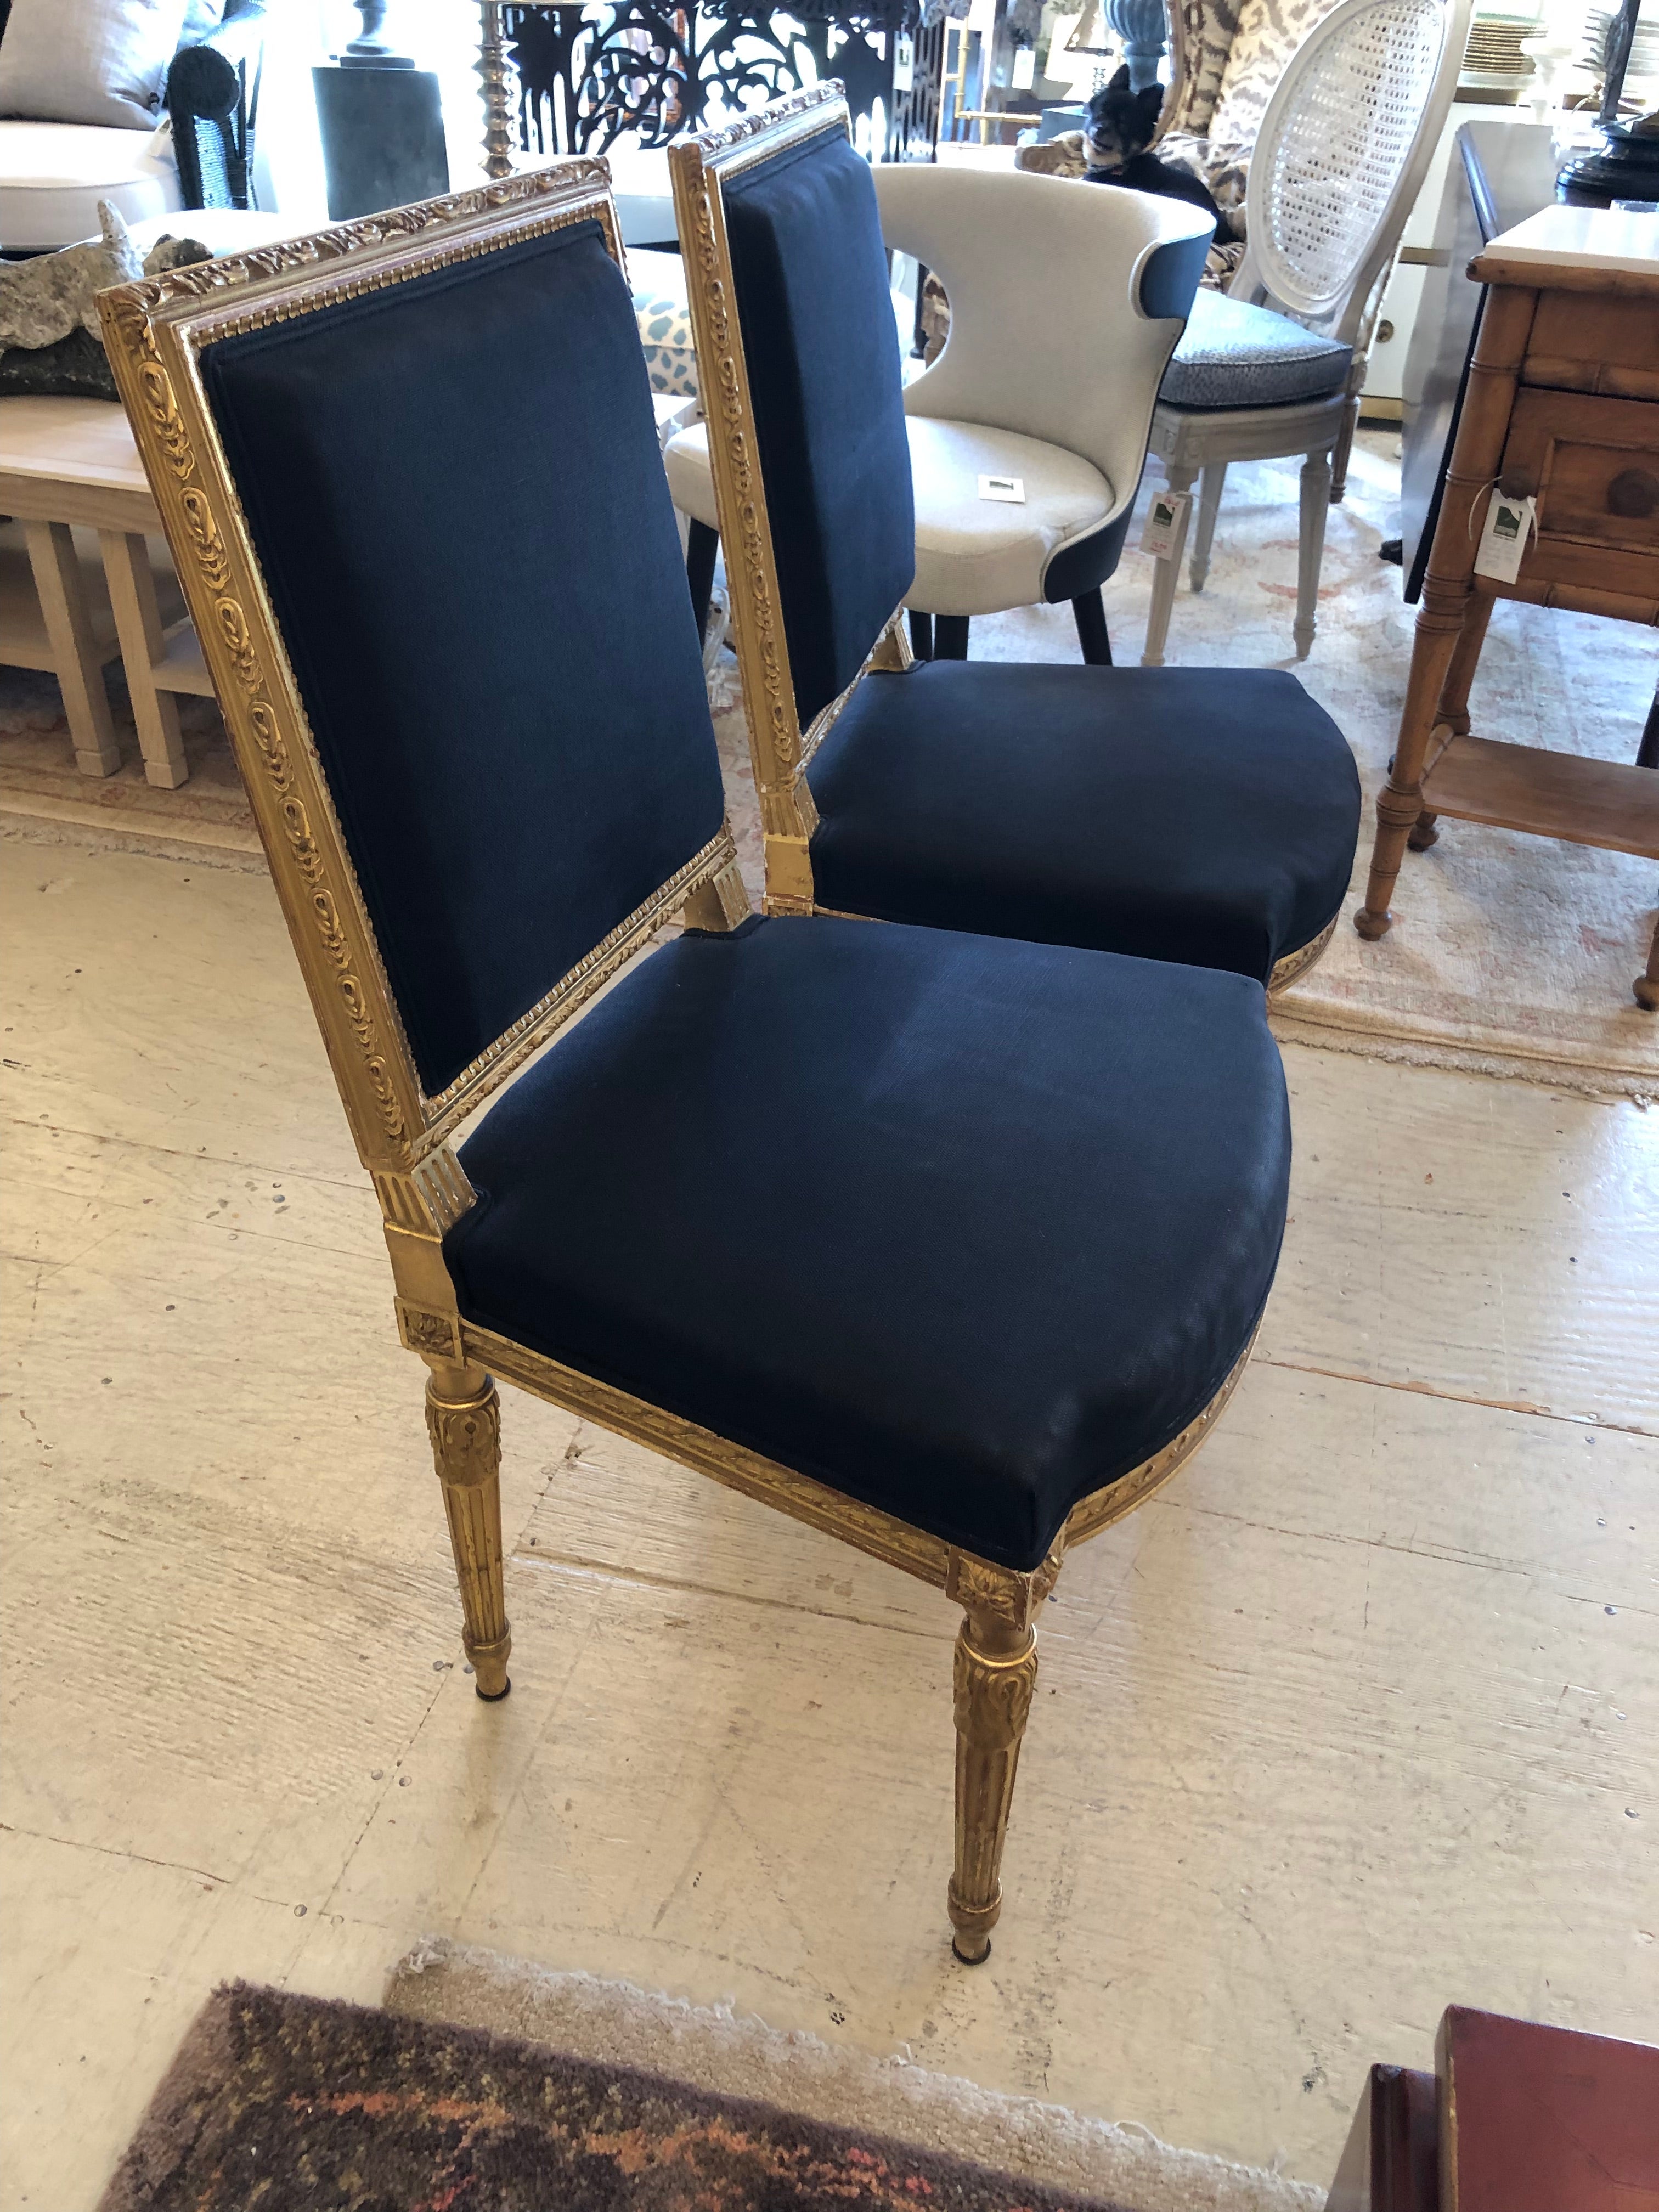 Pretty and classic antique Louis XVI style French fauteuils having slightly chippy gorgeously aged giltwood frames and navy blue upholstery.  

Kamille